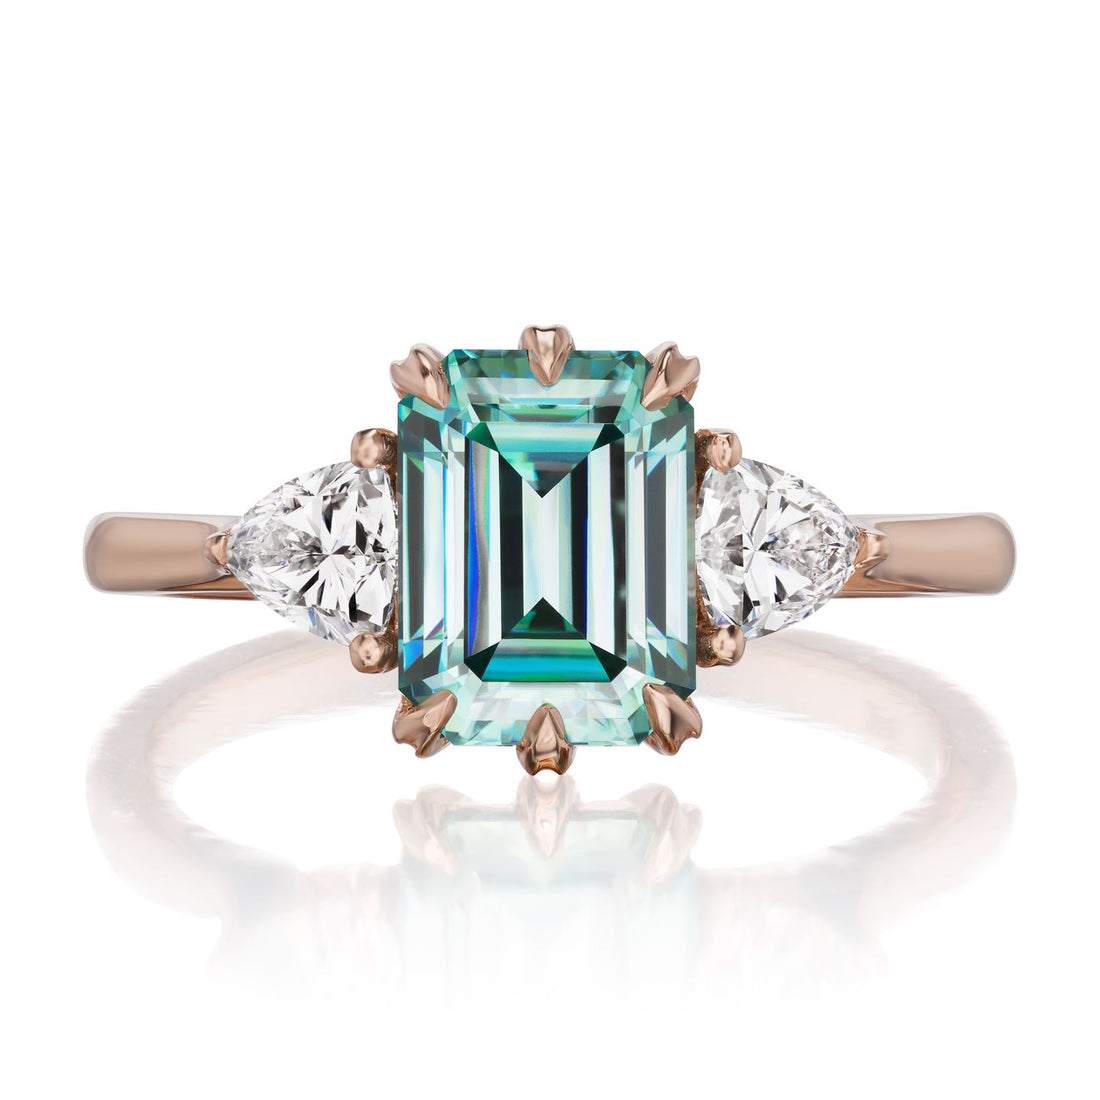 Avery | Emerald Cut Teal Moissanite (2.17ctw) | Kristin Coffin Jewelry